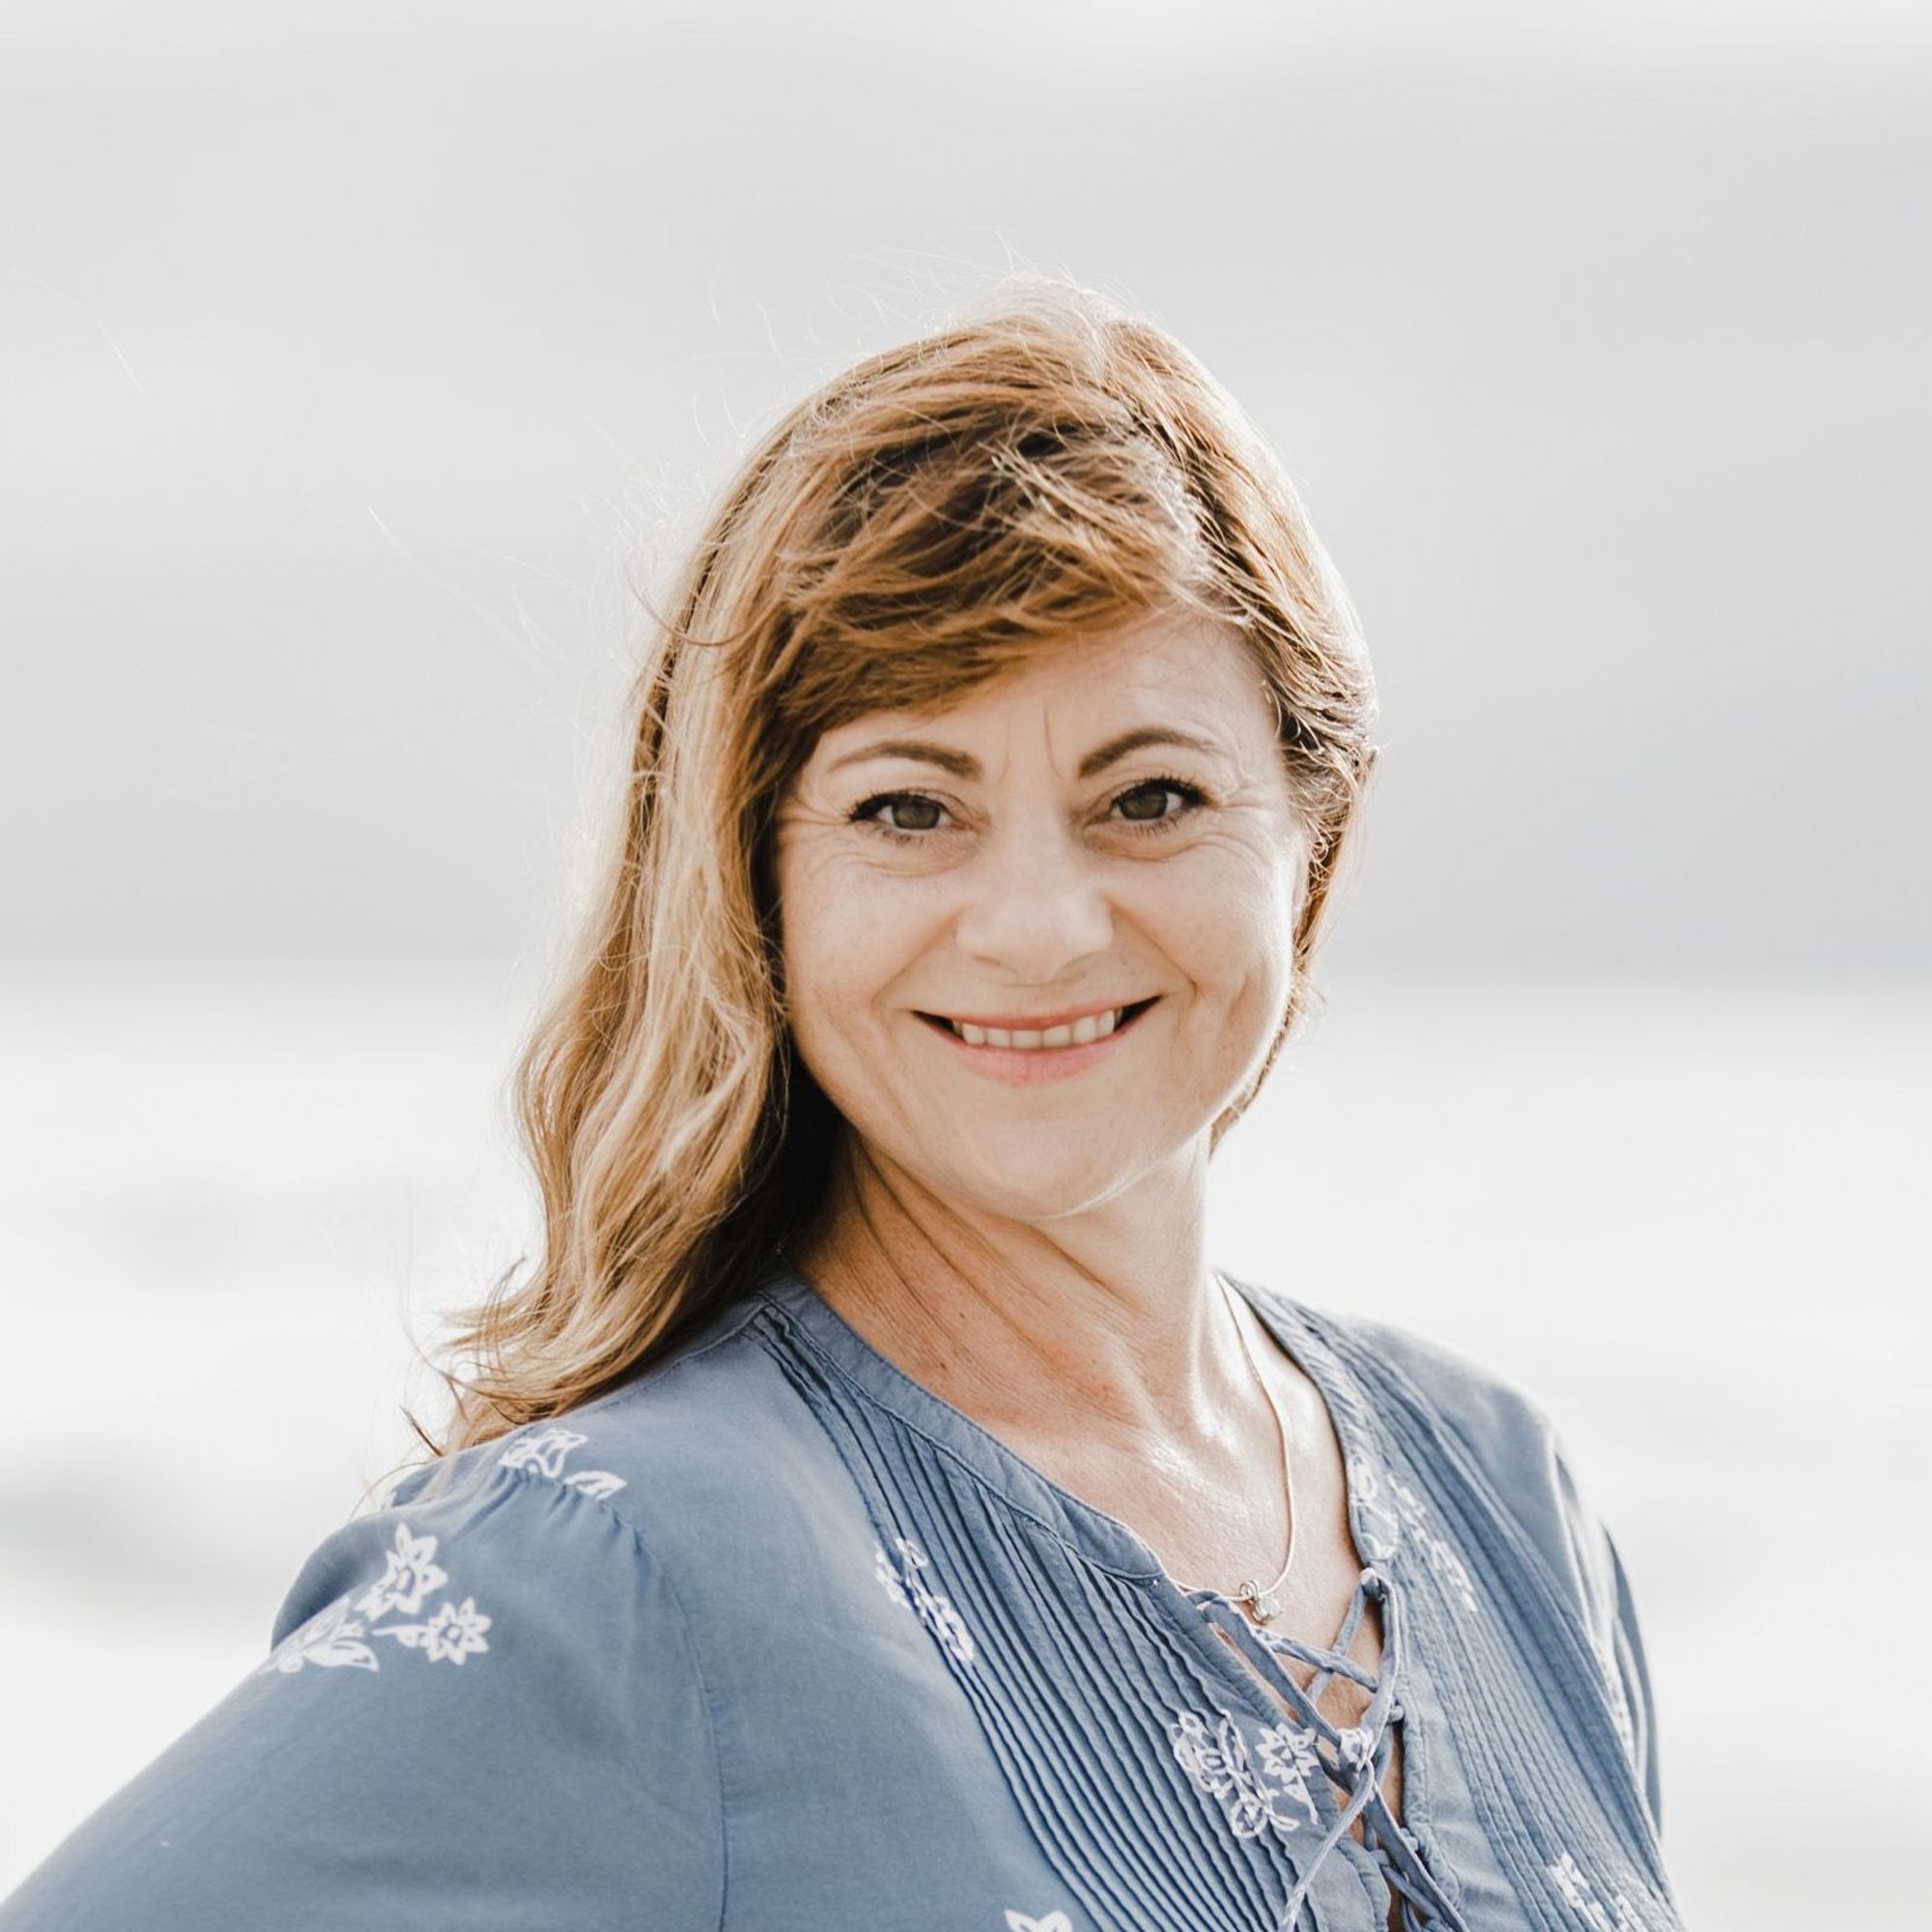 Jamie Hansen
Director of Solution Engineering
Prior Solution Engineering Director at Salesforce • Entrepreneur and Business Coach • Twin mom and professional baker